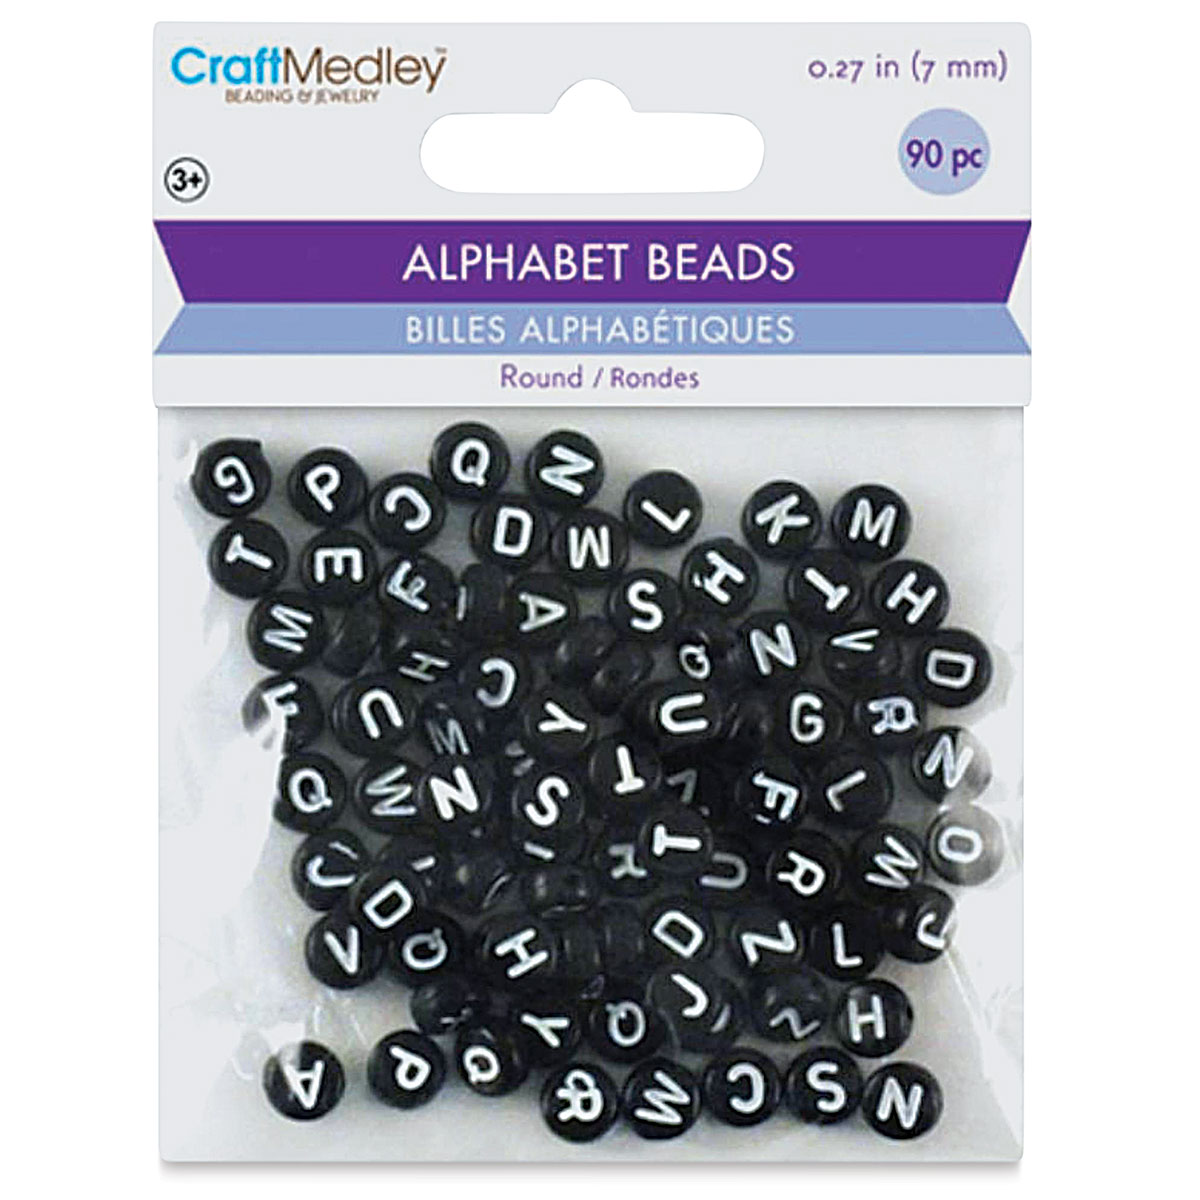 Craft Medley Alphabet Beads - White with Black Letters, Package of